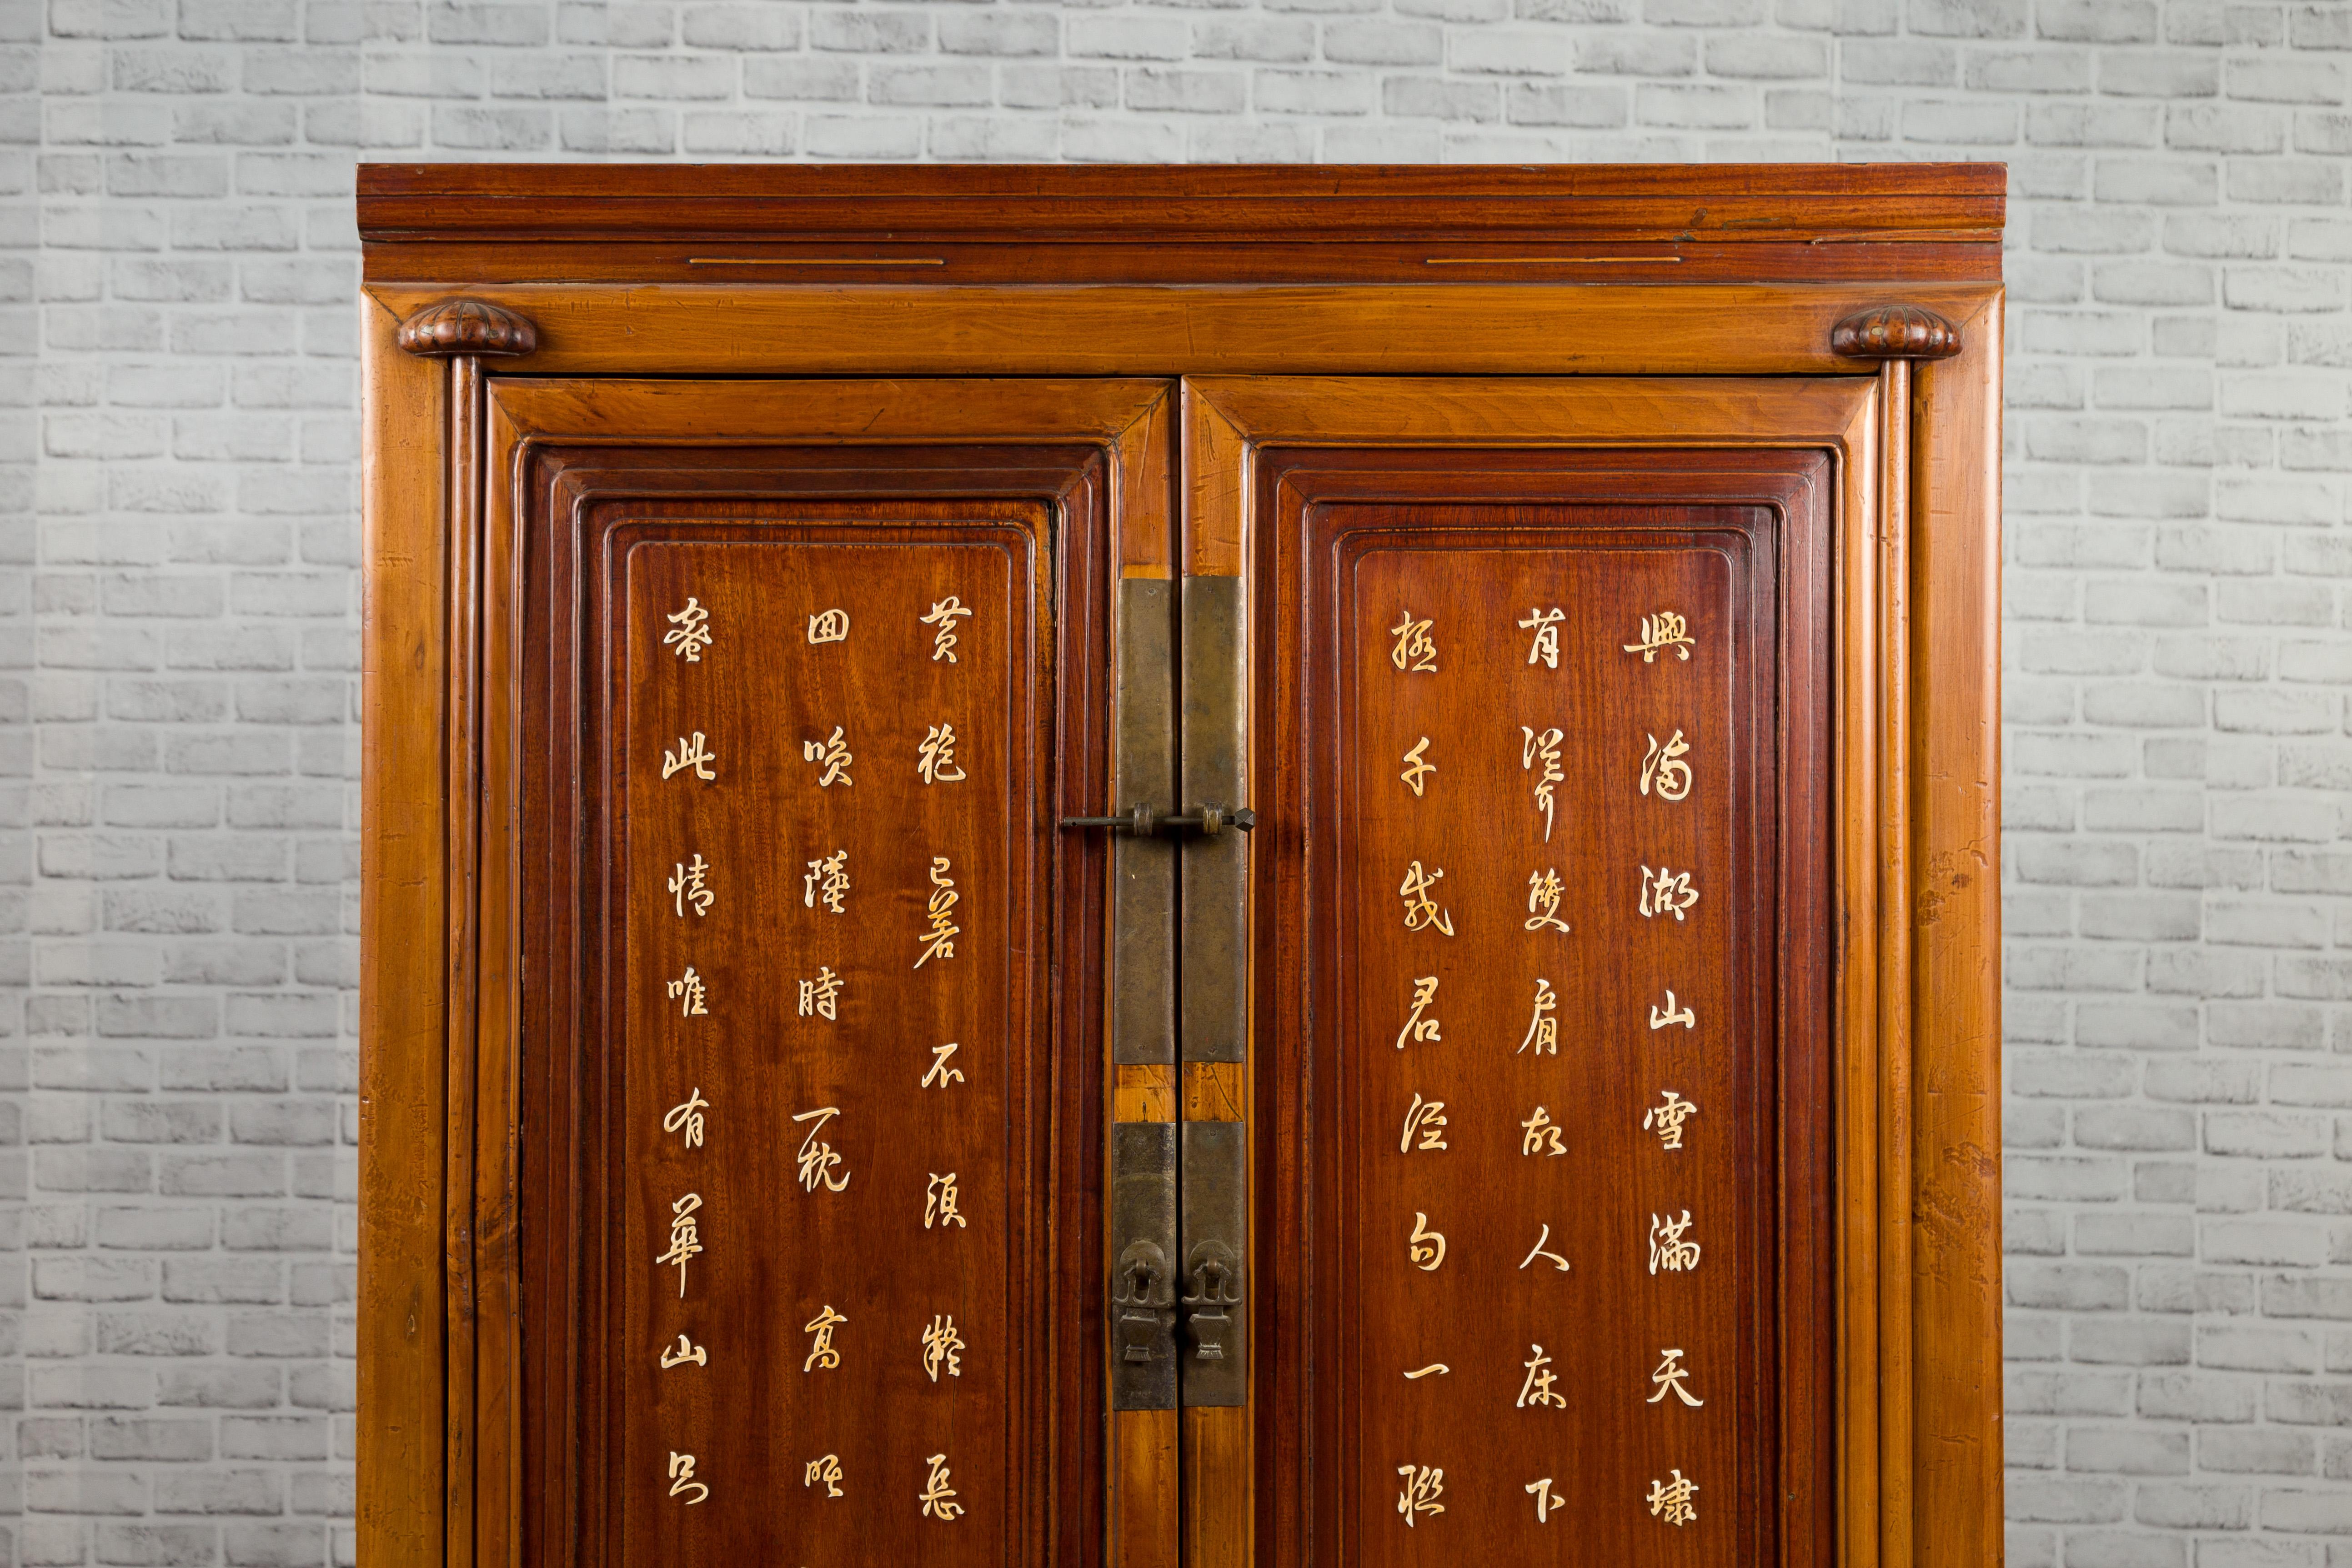 Chinese Antique Two-Toned Cabinet with Inlaid Calligraphy Motifs and Drawers In Good Condition For Sale In Yonkers, NY